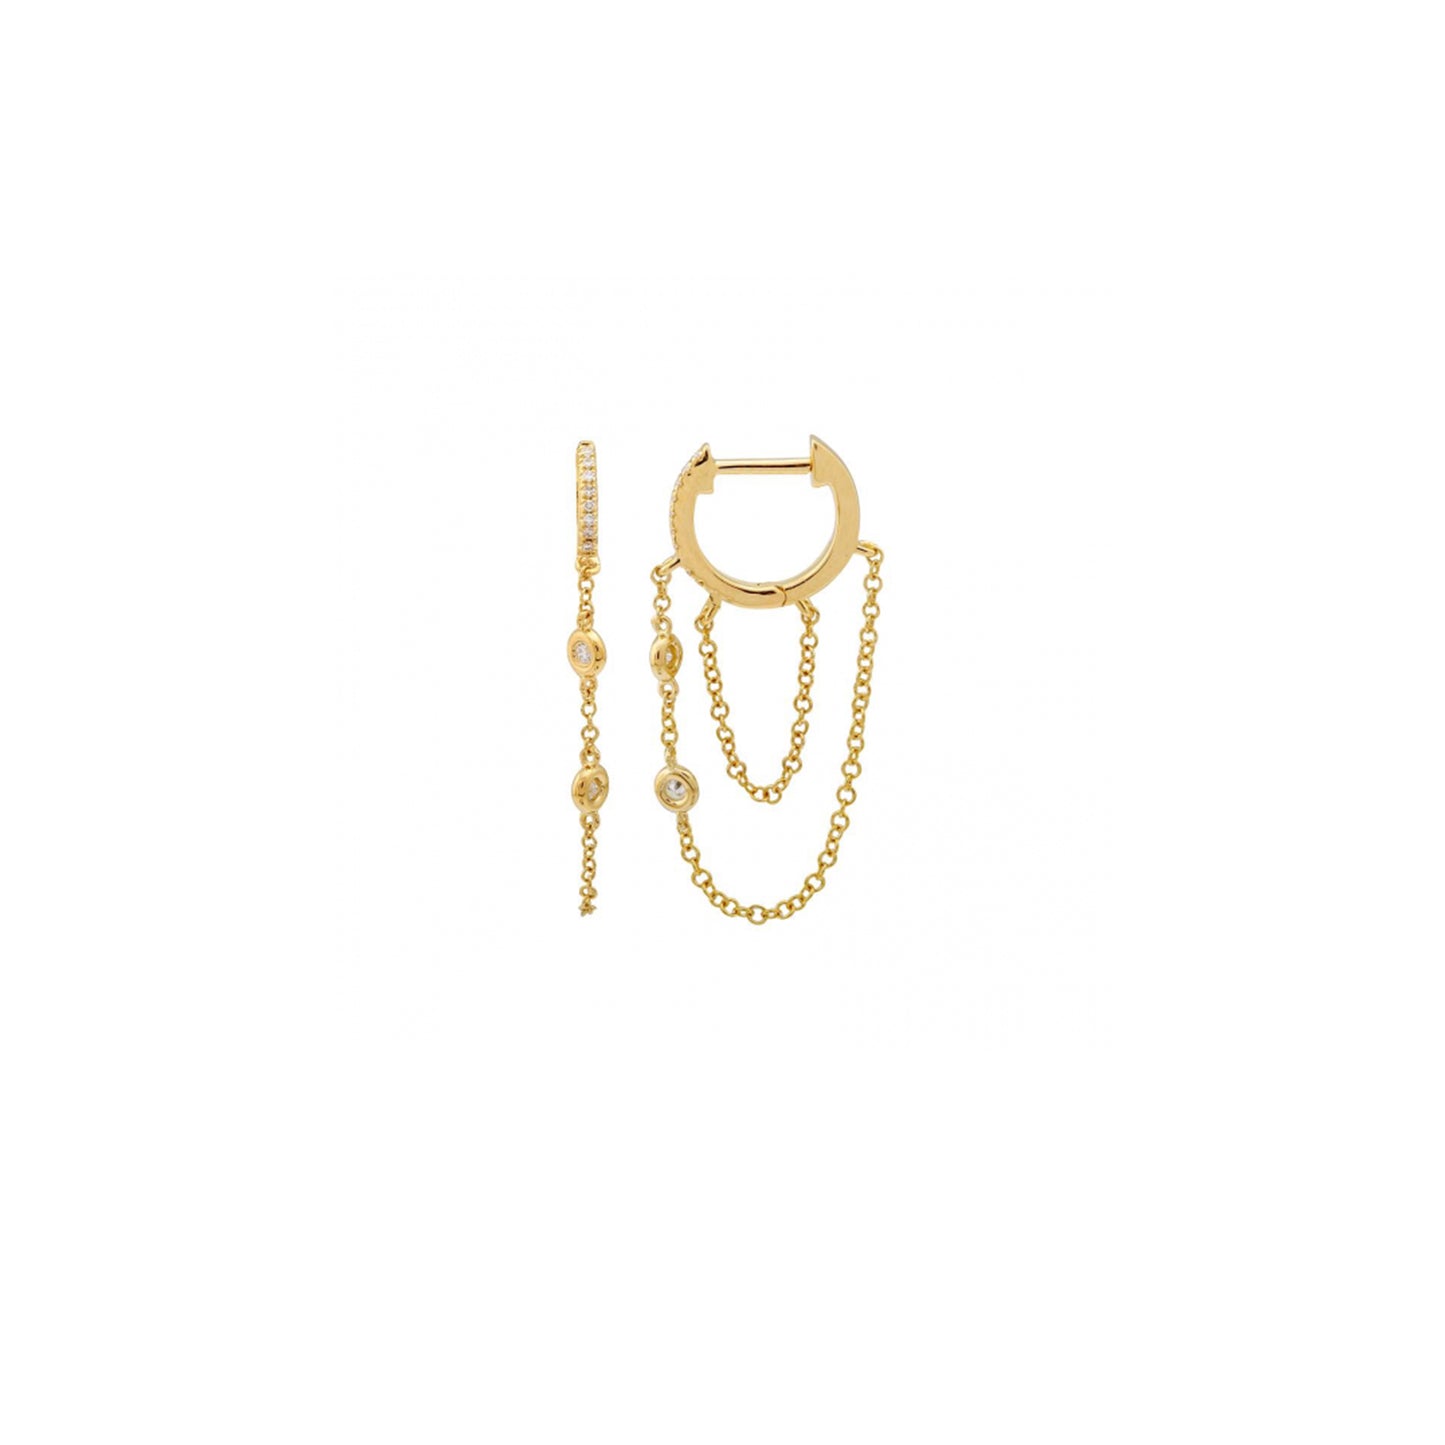 Dangling Chain Pave Huggie Hoops in Yellow Gold